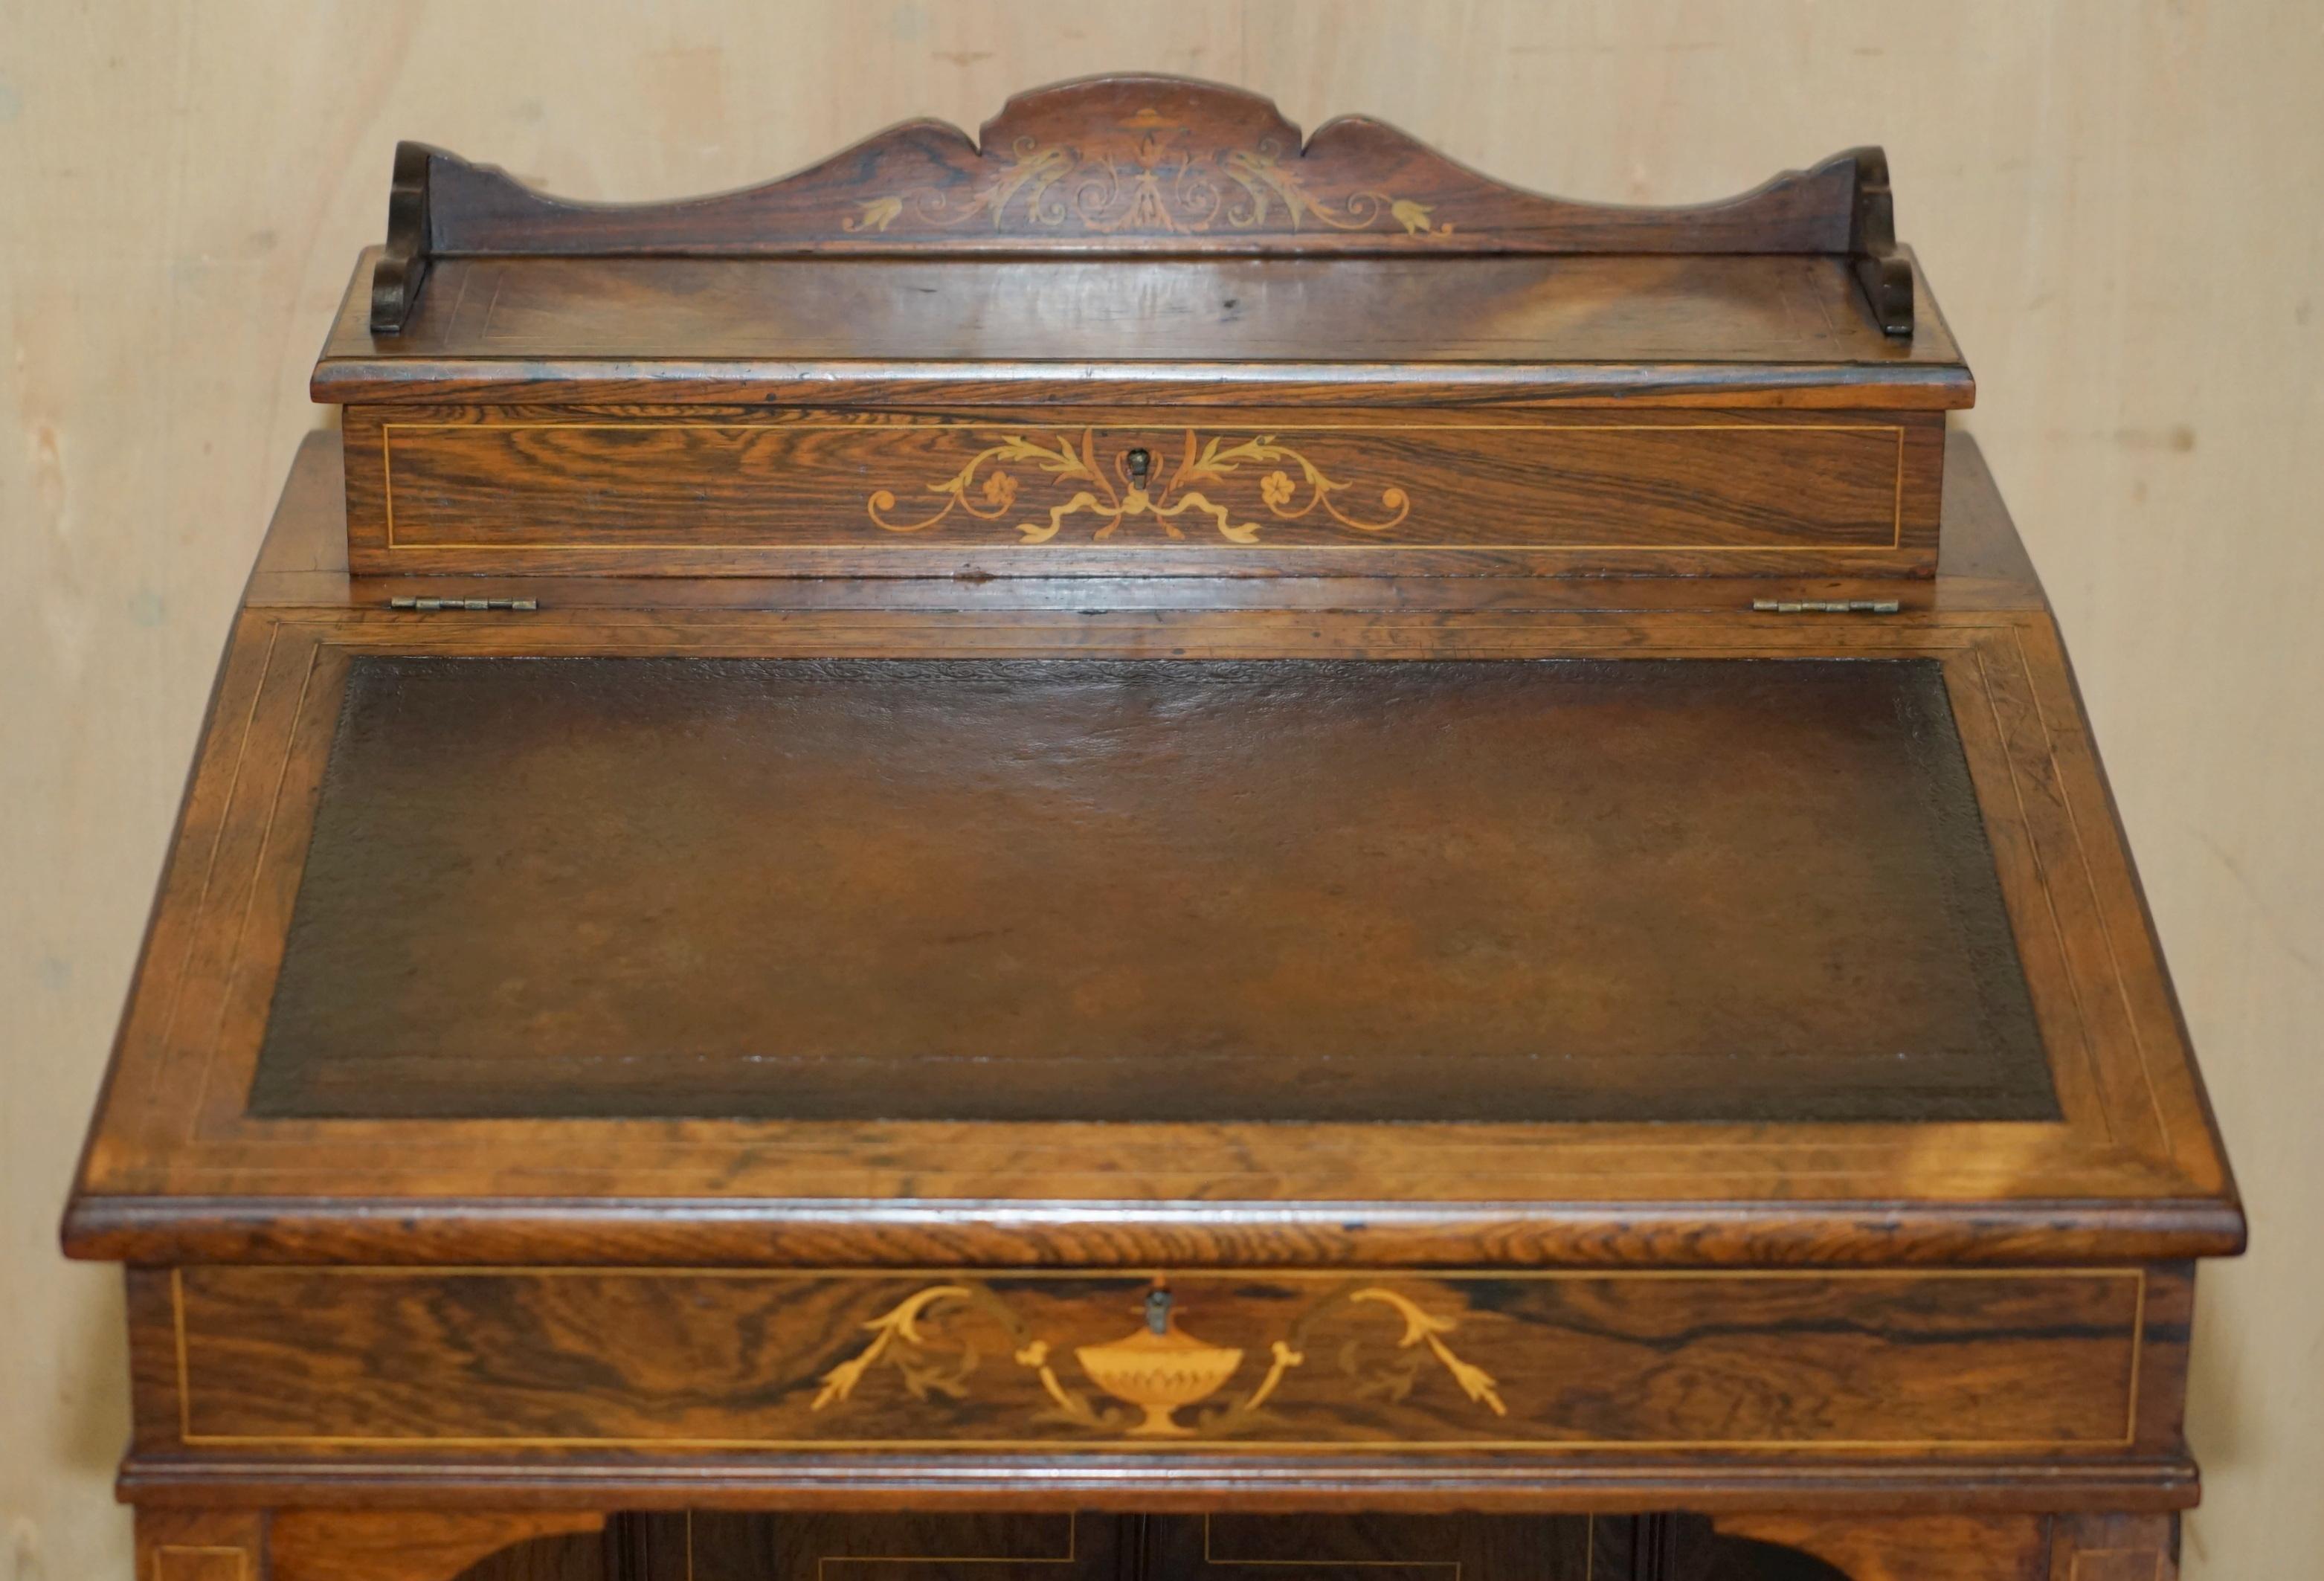 English RESTORED ViCTORIAN HARDWOOD MARQUETRY INLAID & BROWN LEATHER DAVENPORT DESK For Sale